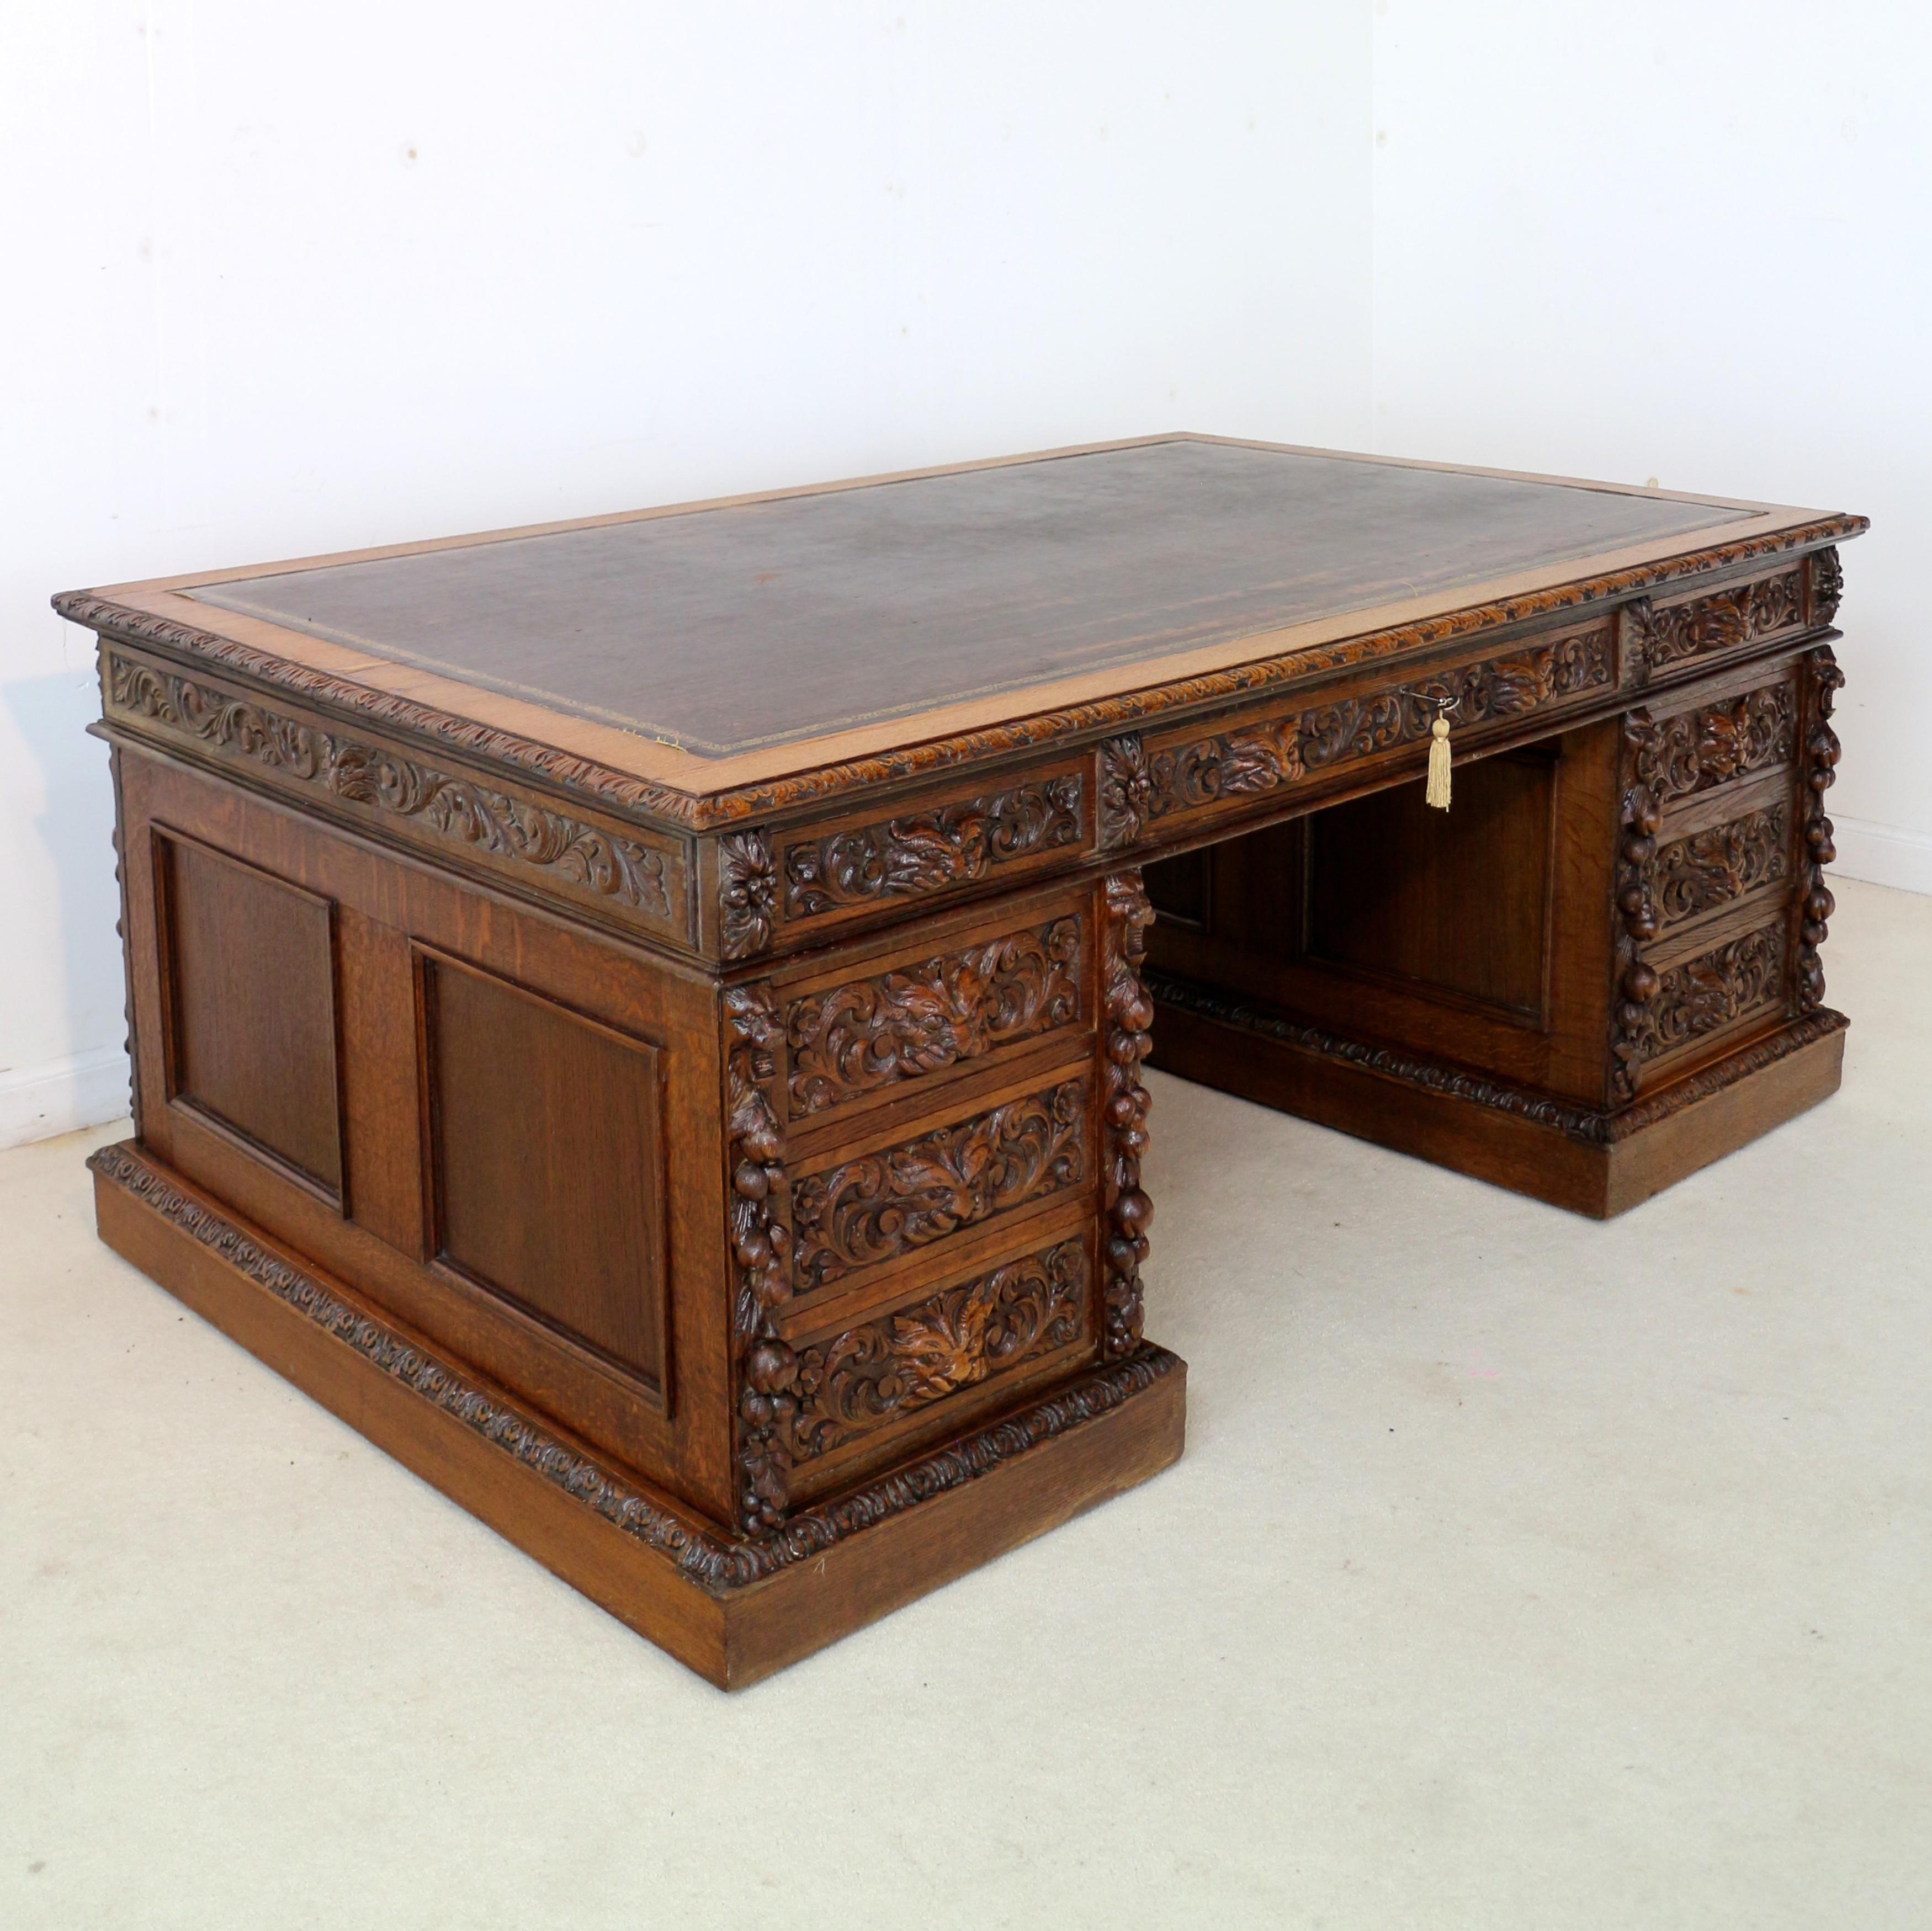 A stunning, beautifully carved Elizabethan Revival Victorian oak partners desk attributed to Edwards & Roberts of London. The rectangular top with a foliate carved edge and gilt embossed brown faux leather writing surface above a carved frieze. One